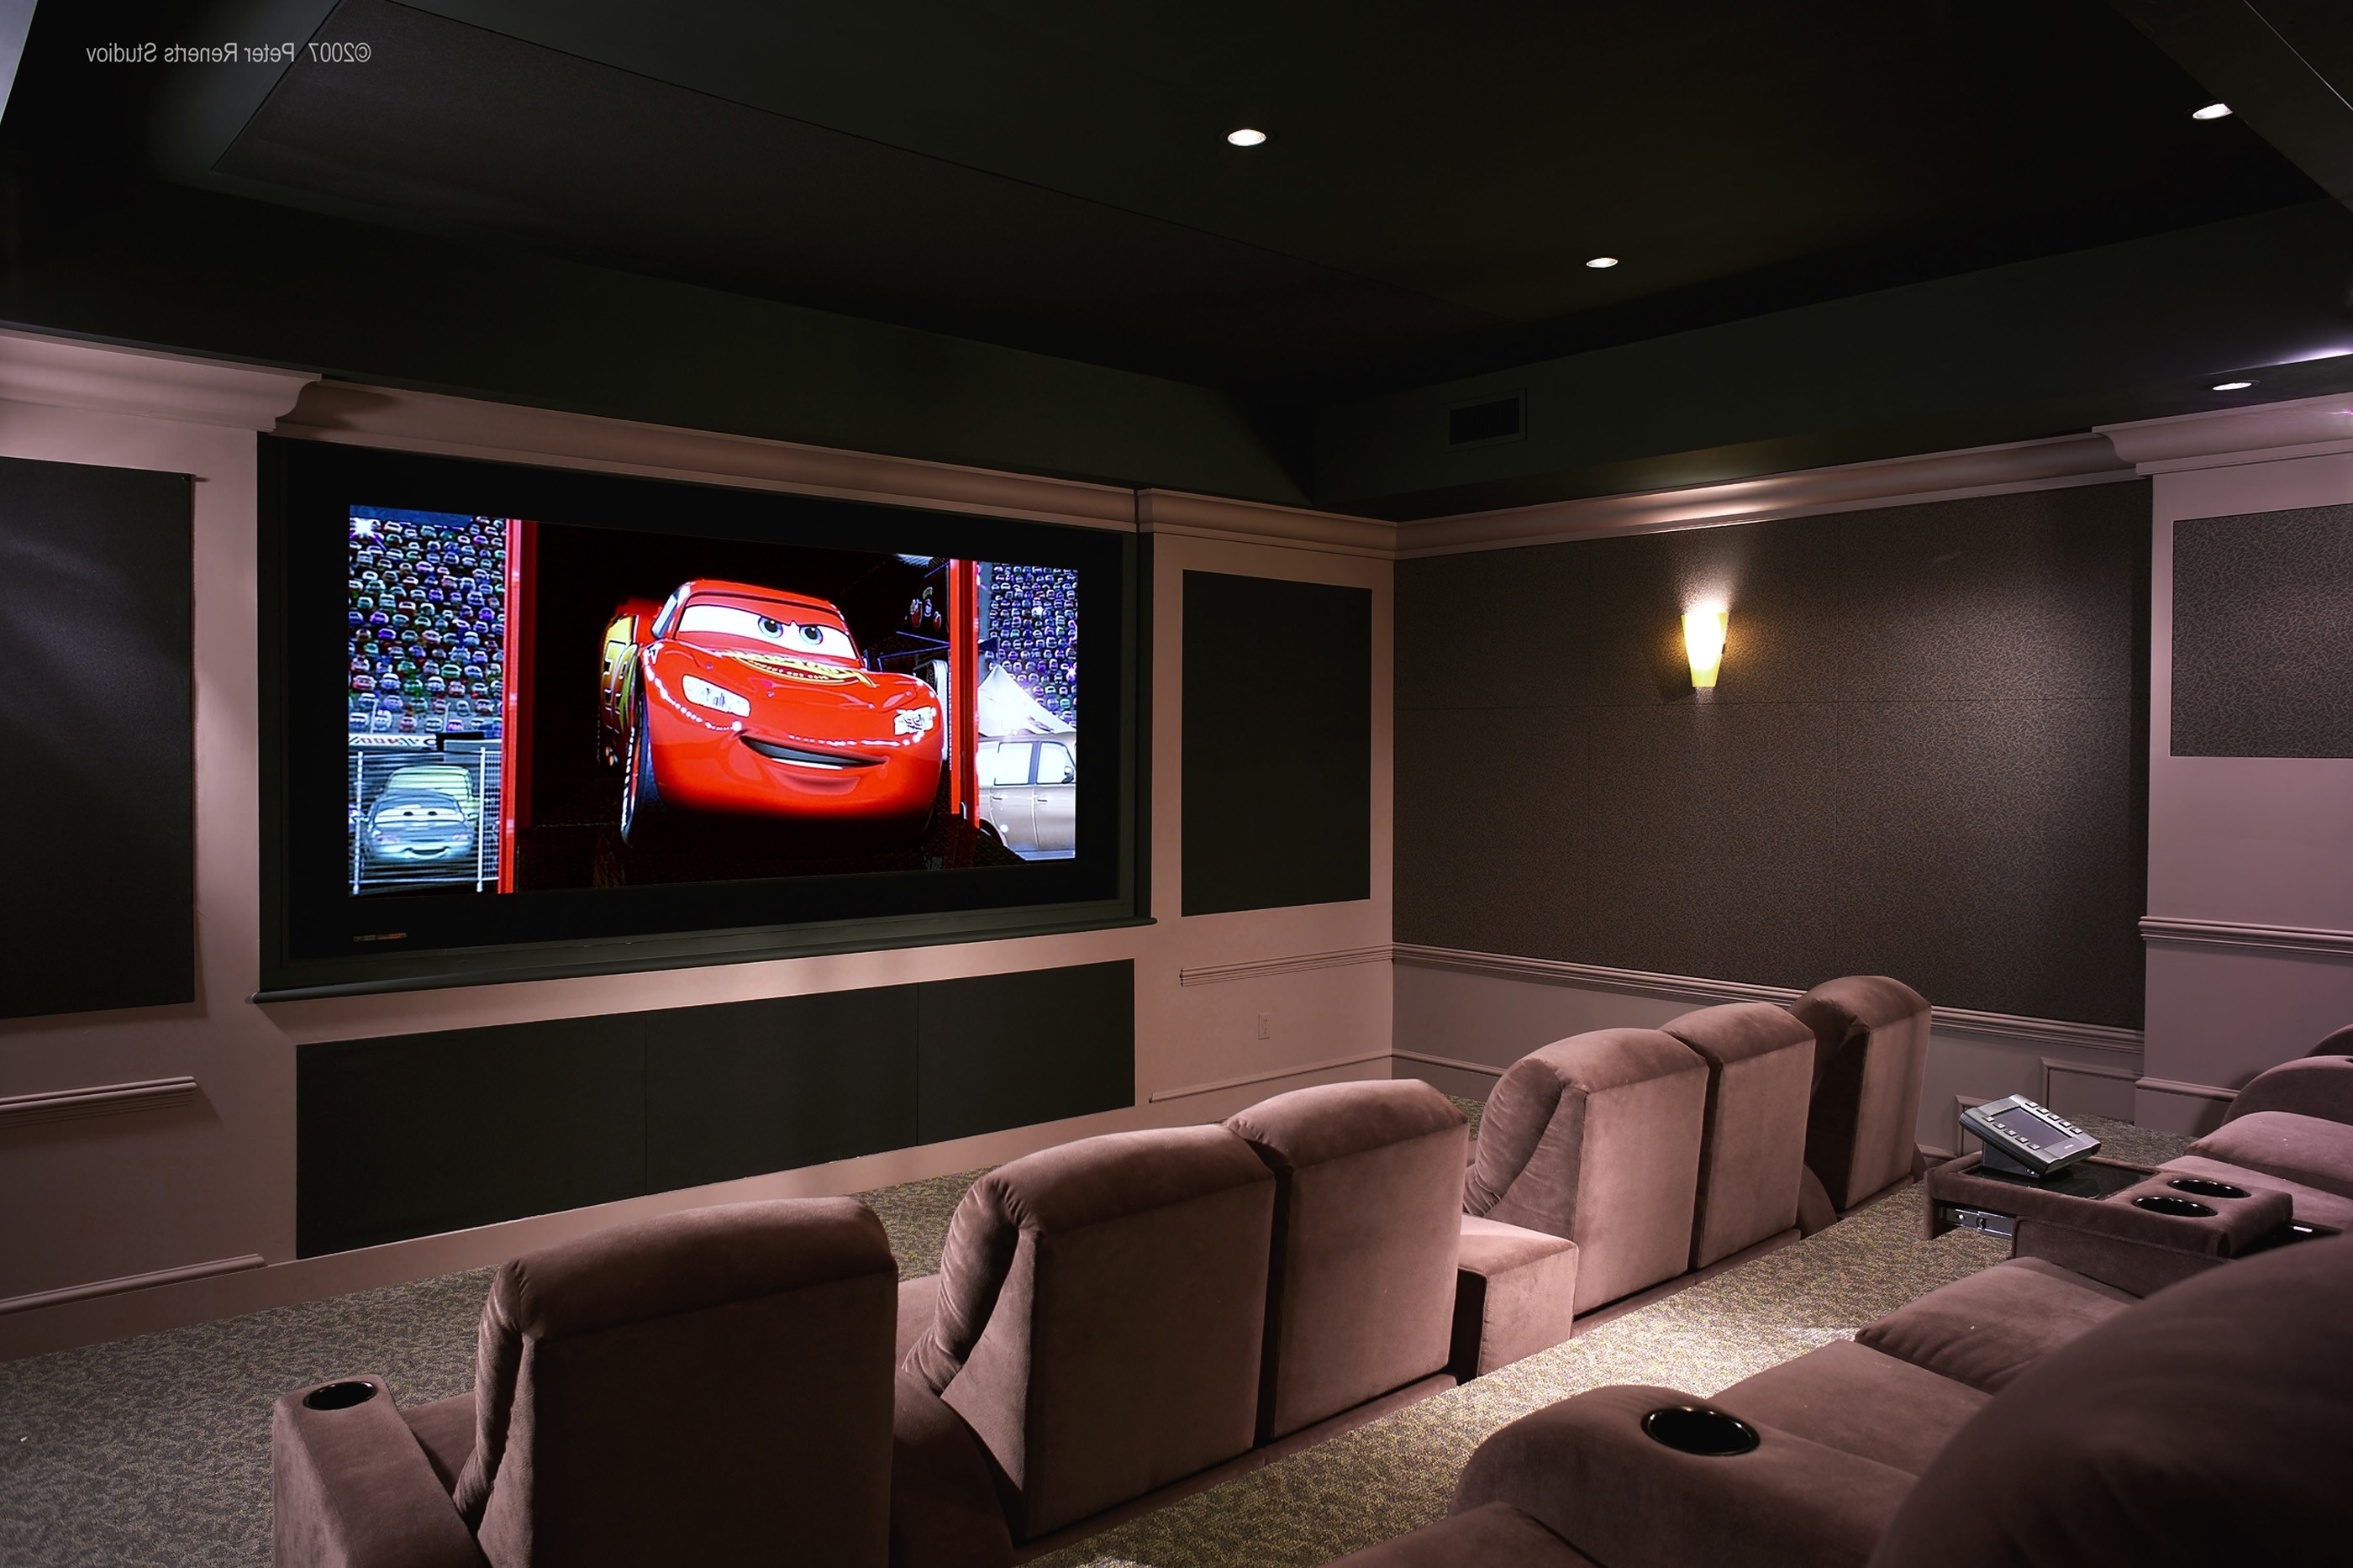 2800x1866 Stunning Theater Rooms In Homes 53 For Your Decor Inspiration With Theater  Rooms In Homes